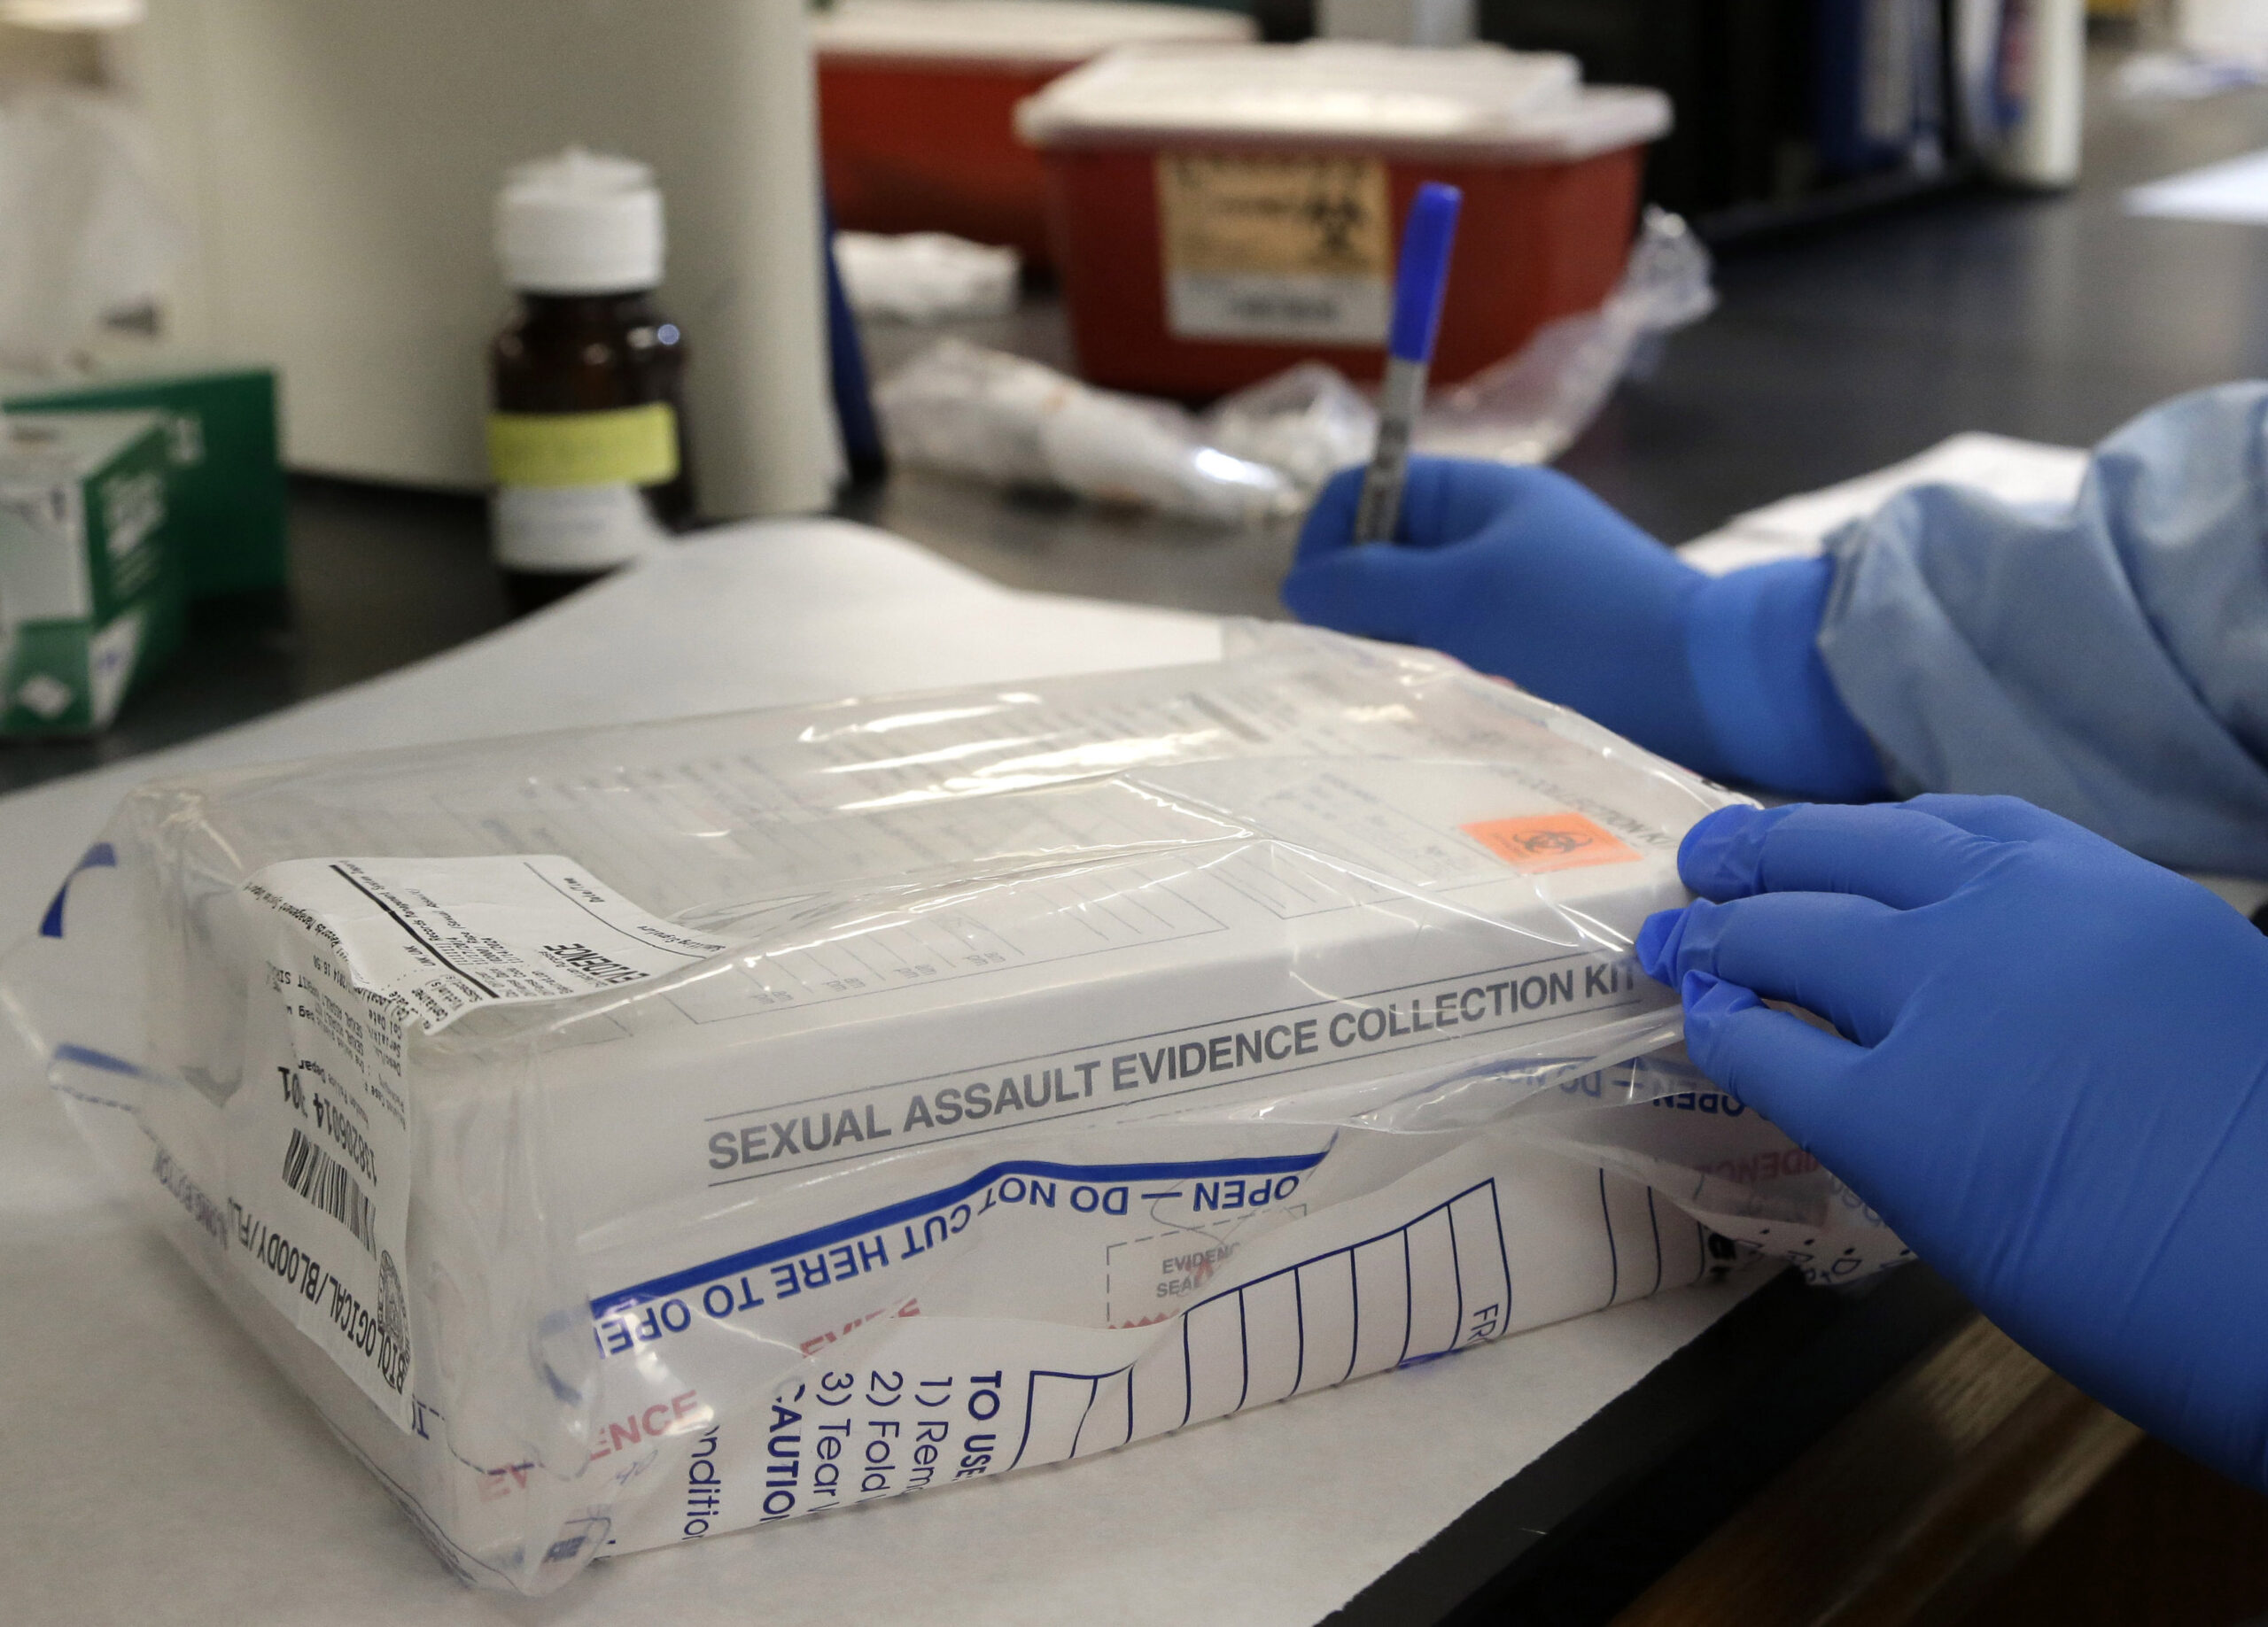 A sexual assault kit is logged in a lab